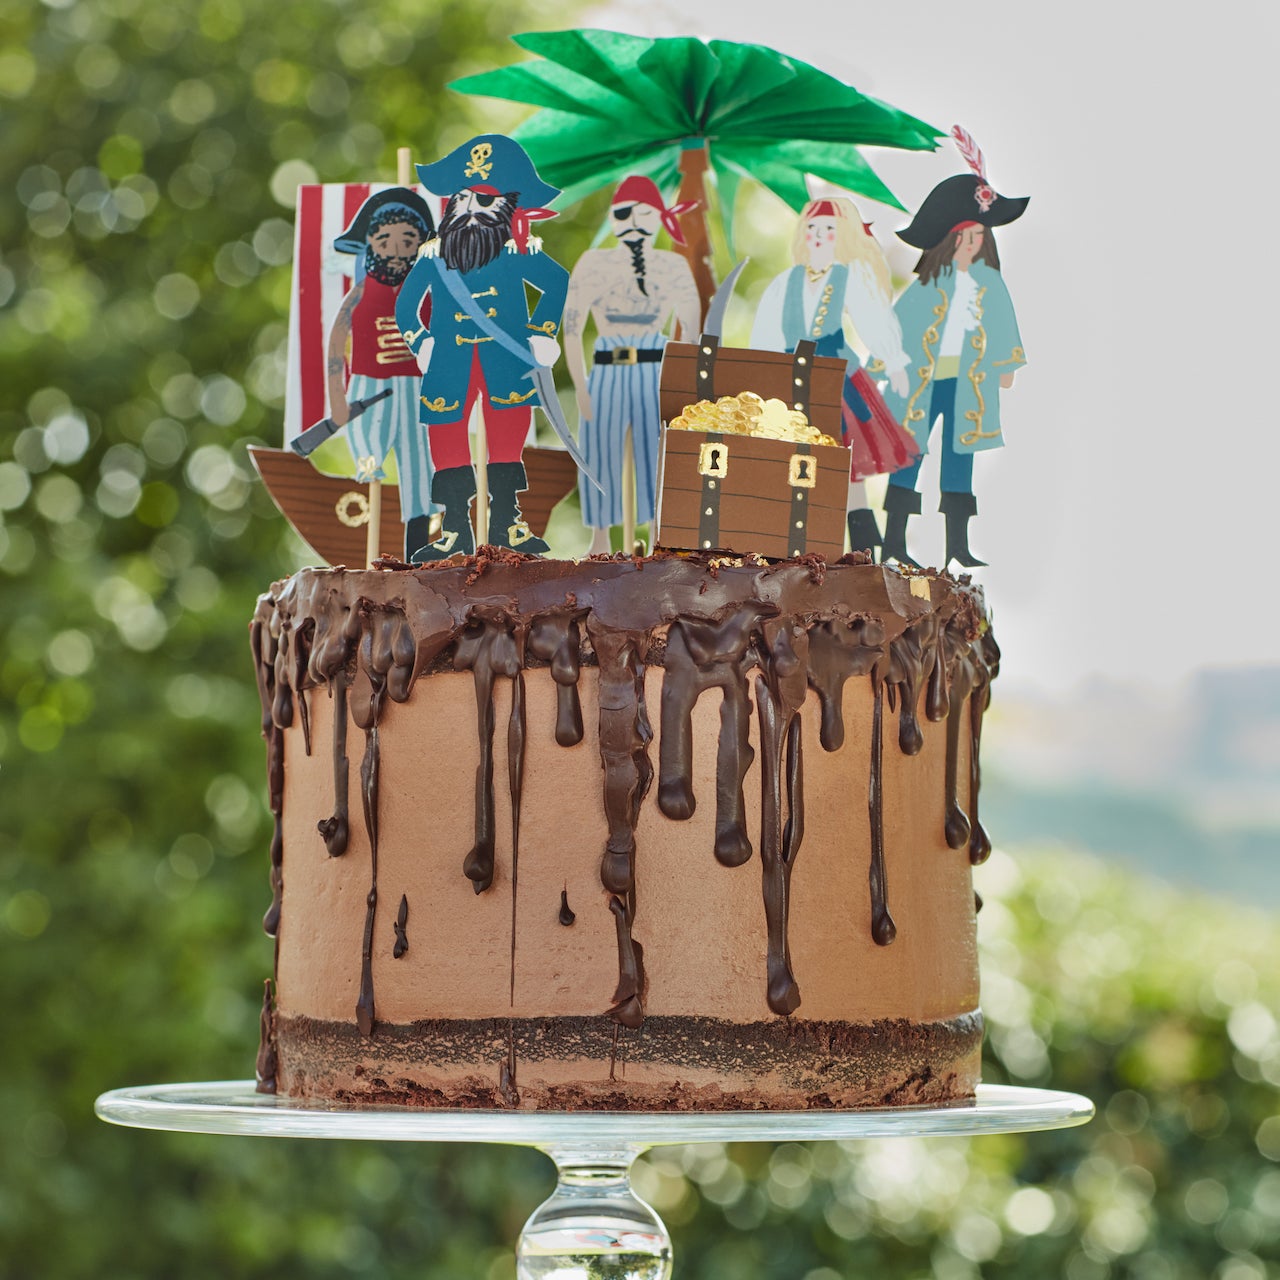 1,466 Pirate Cake Images, Stock Photos, 3D objects, & Vectors | Shutterstock